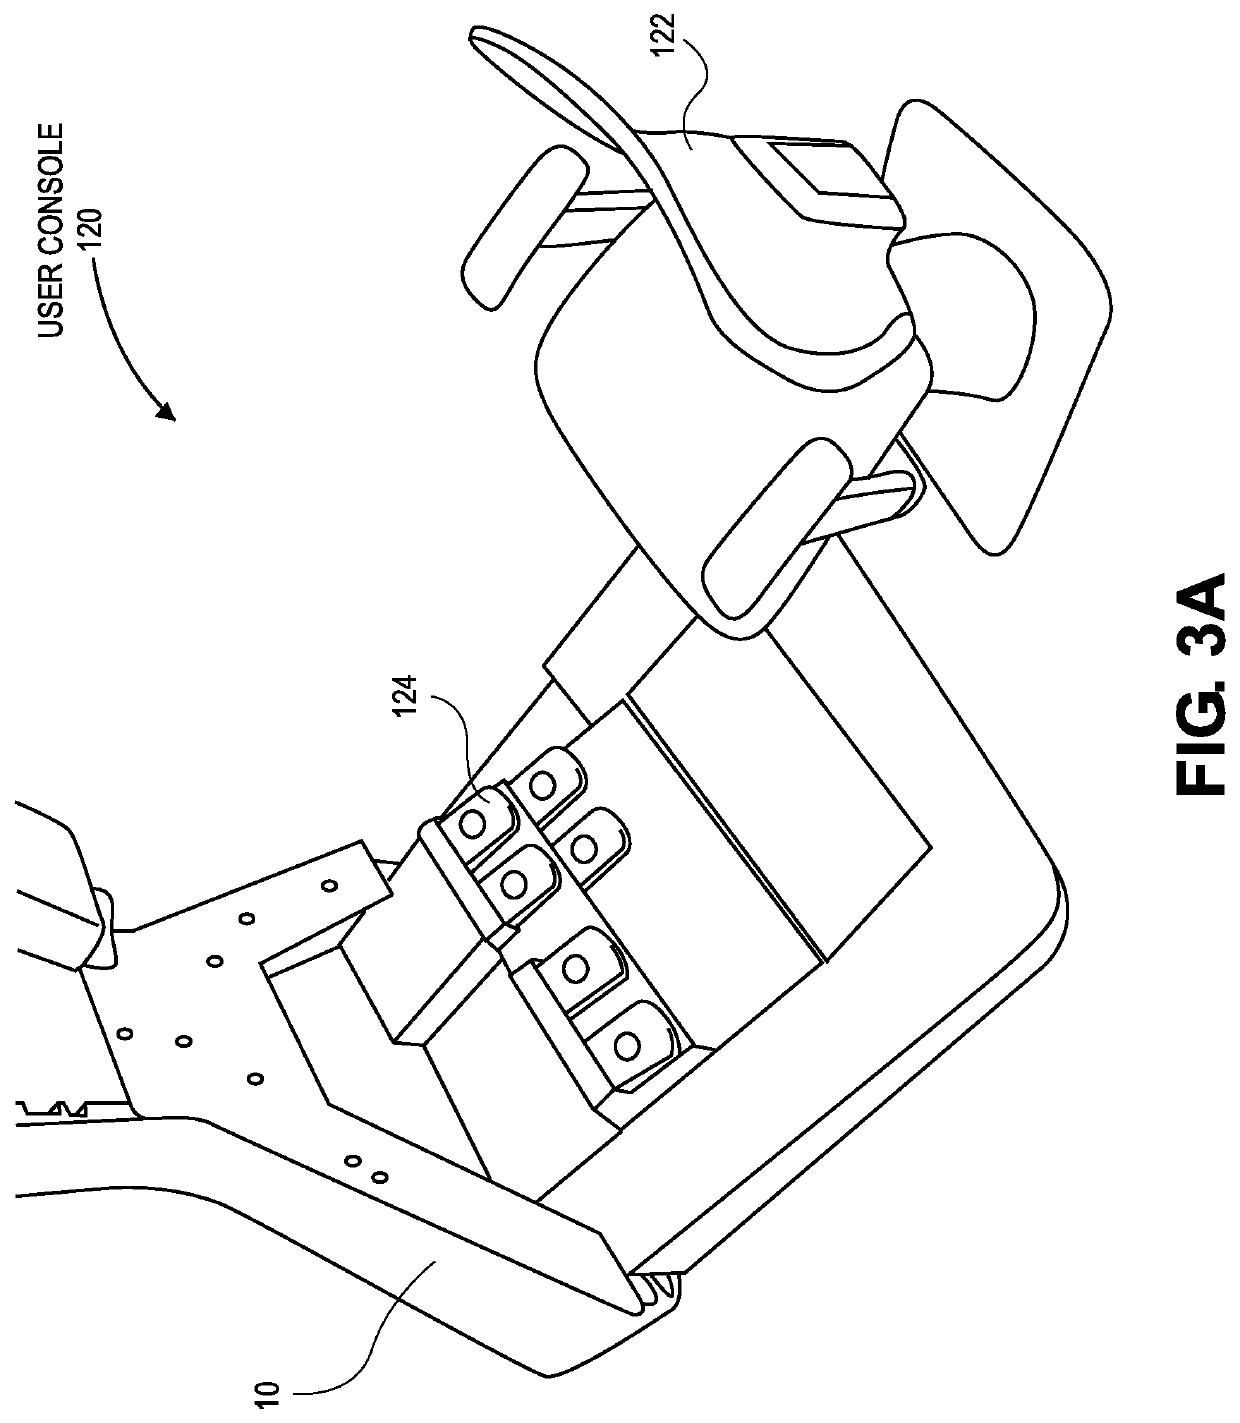 User input device for use in robotic surgery